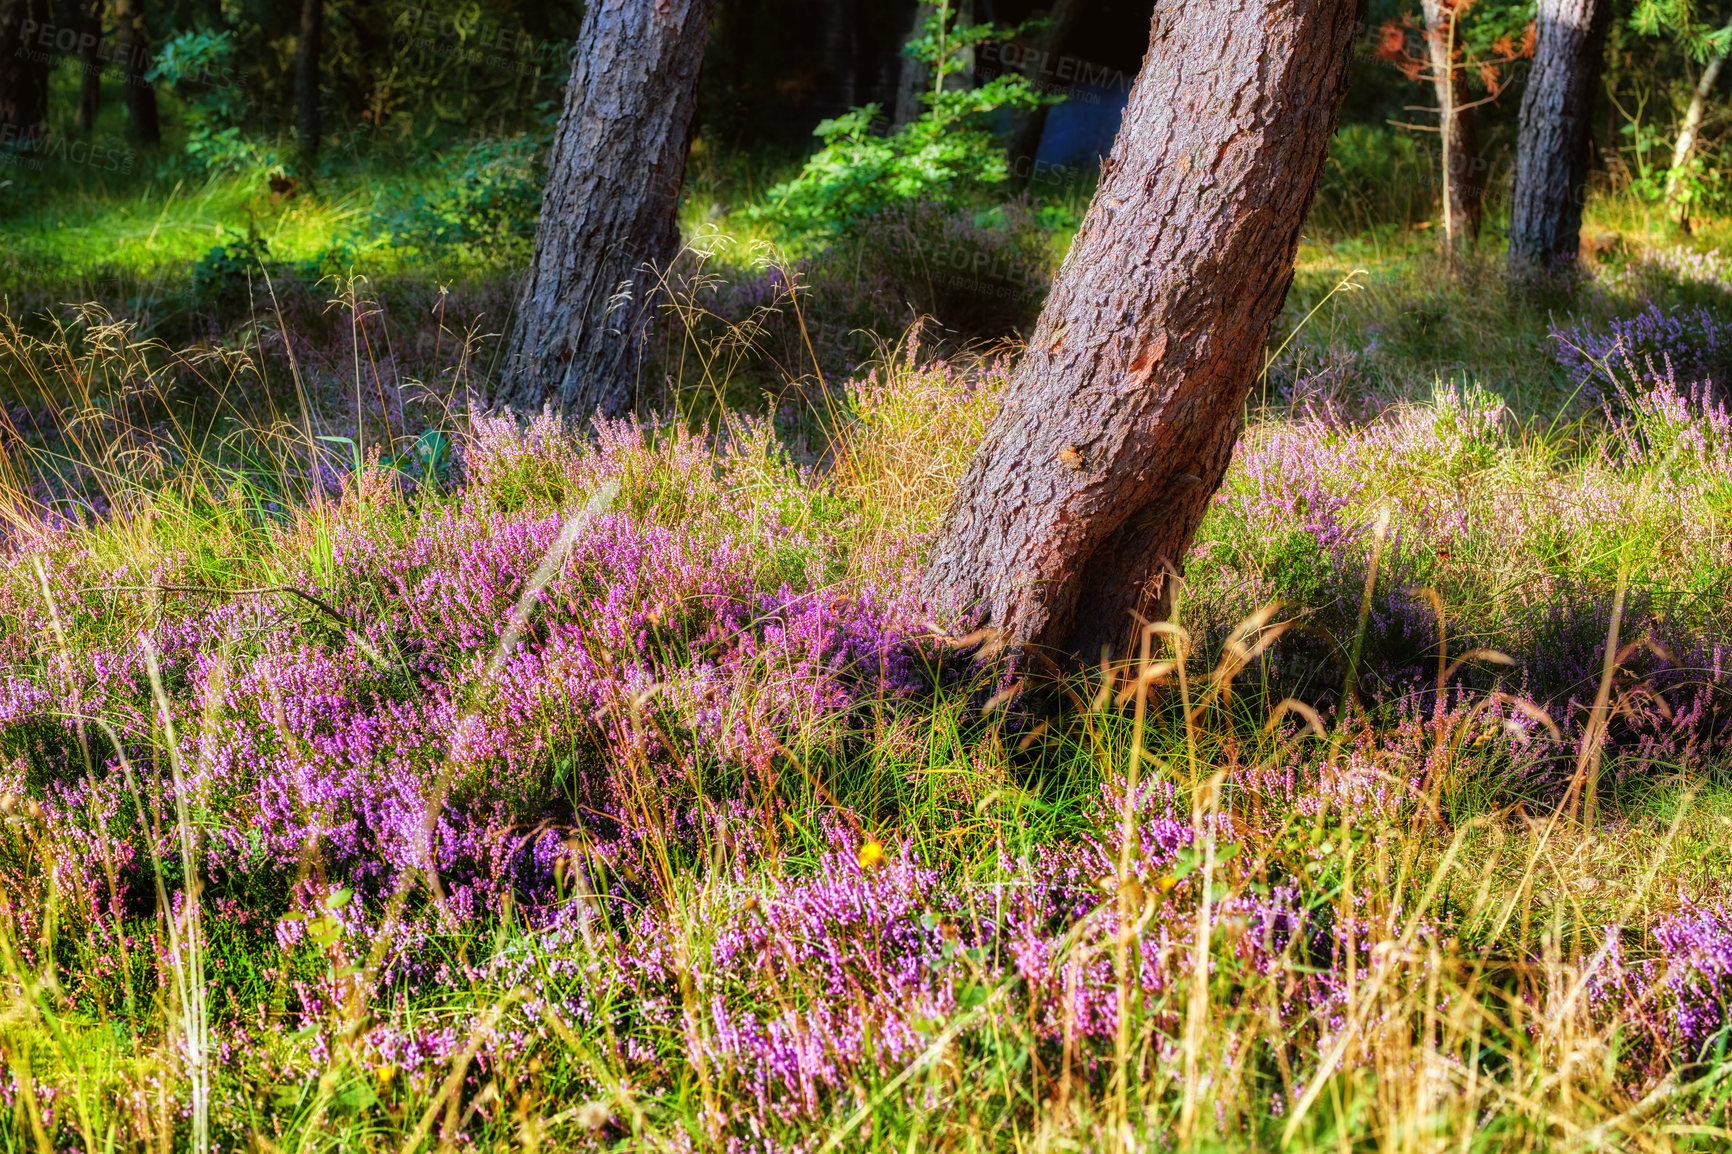 Buy stock photo Heather growing in a wild forest. Beautiful landscape of purple flowers flourishing in grass under a tree in nature. Scenic view of lush green vegetation in an uncultivated environment